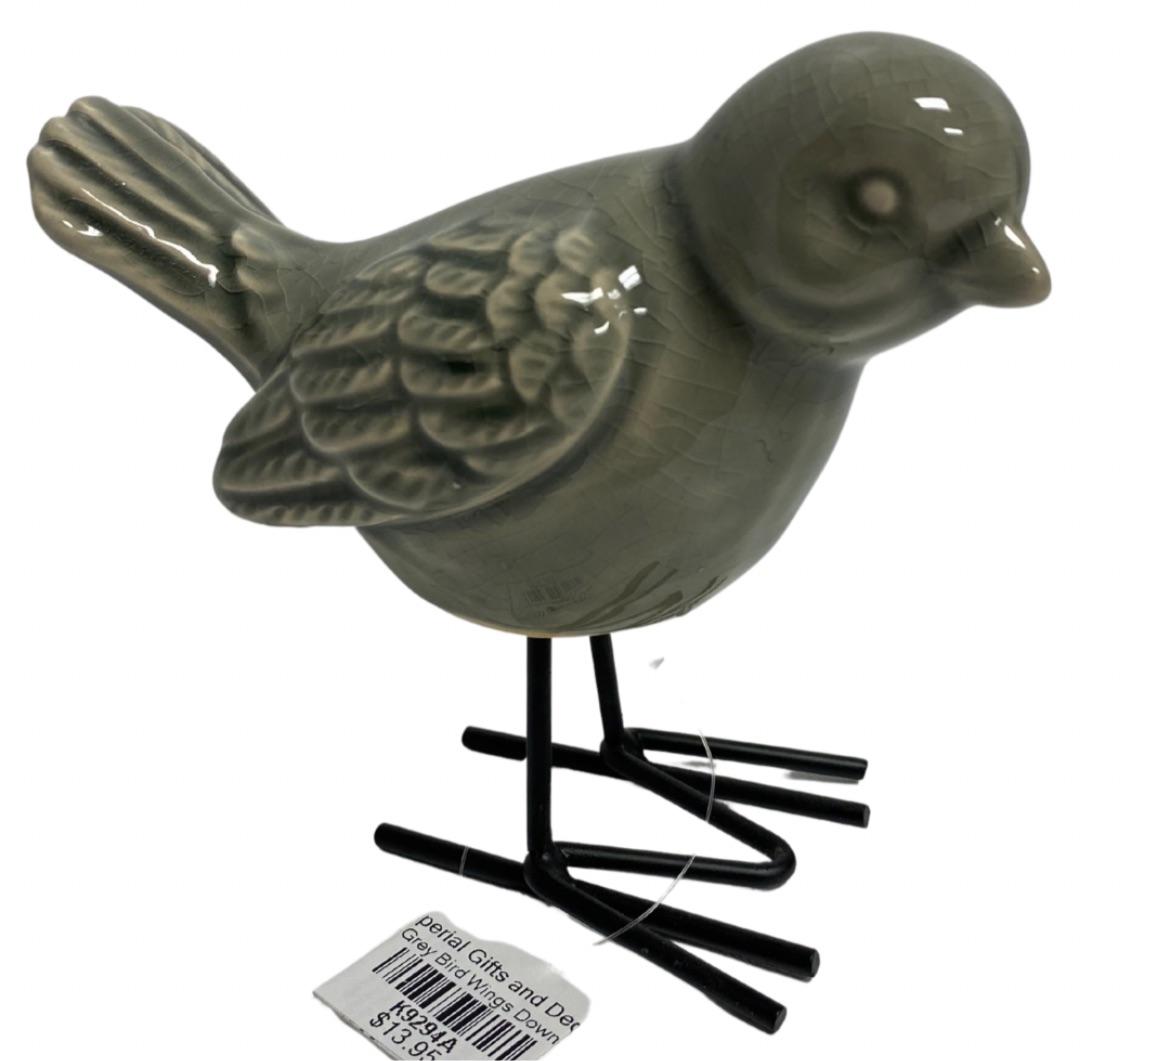 Grey Standing Ceramic Bird - Available in 2 Styles